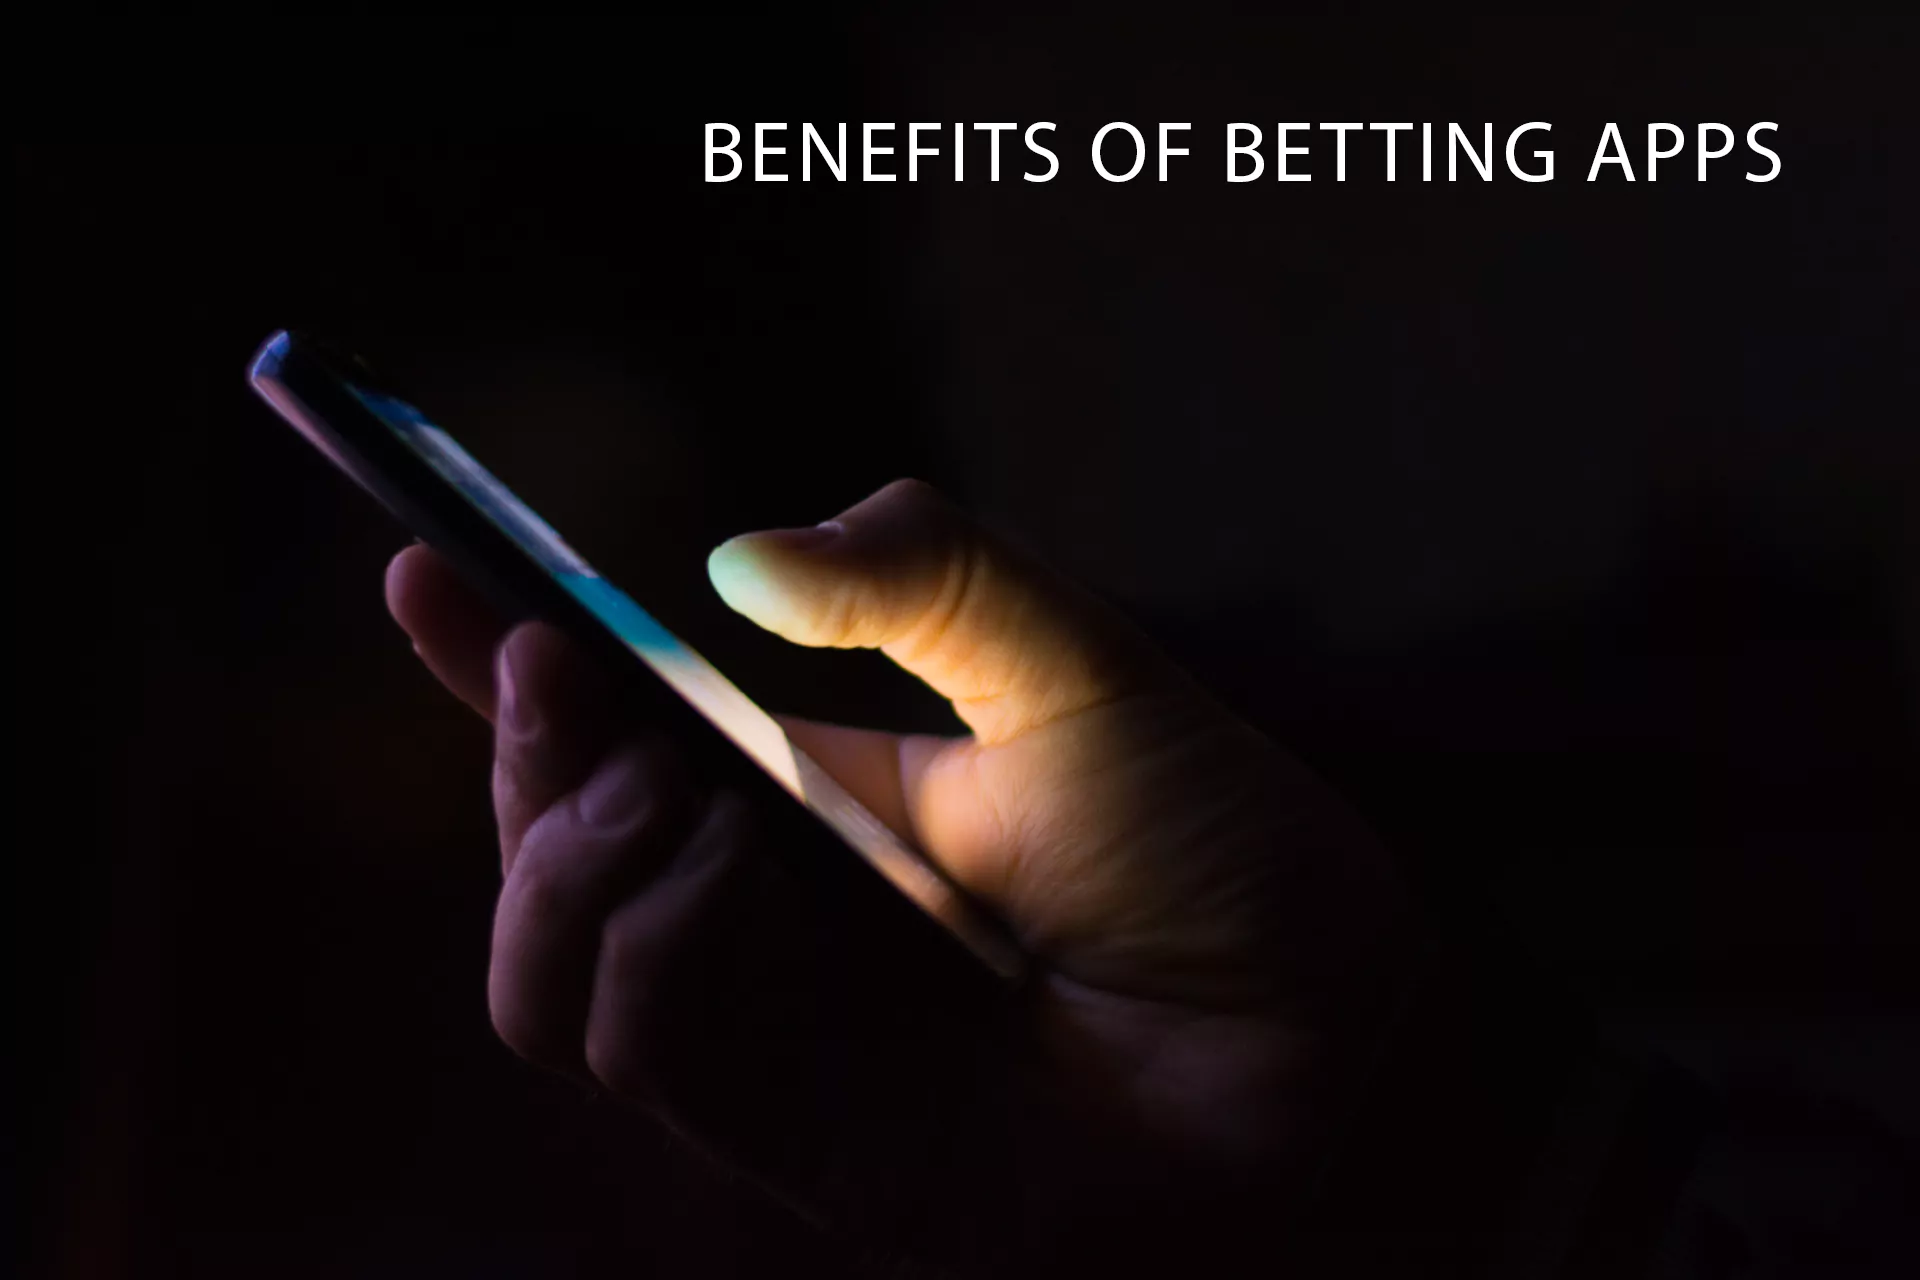 The most important pro of using betting apps is convenience.